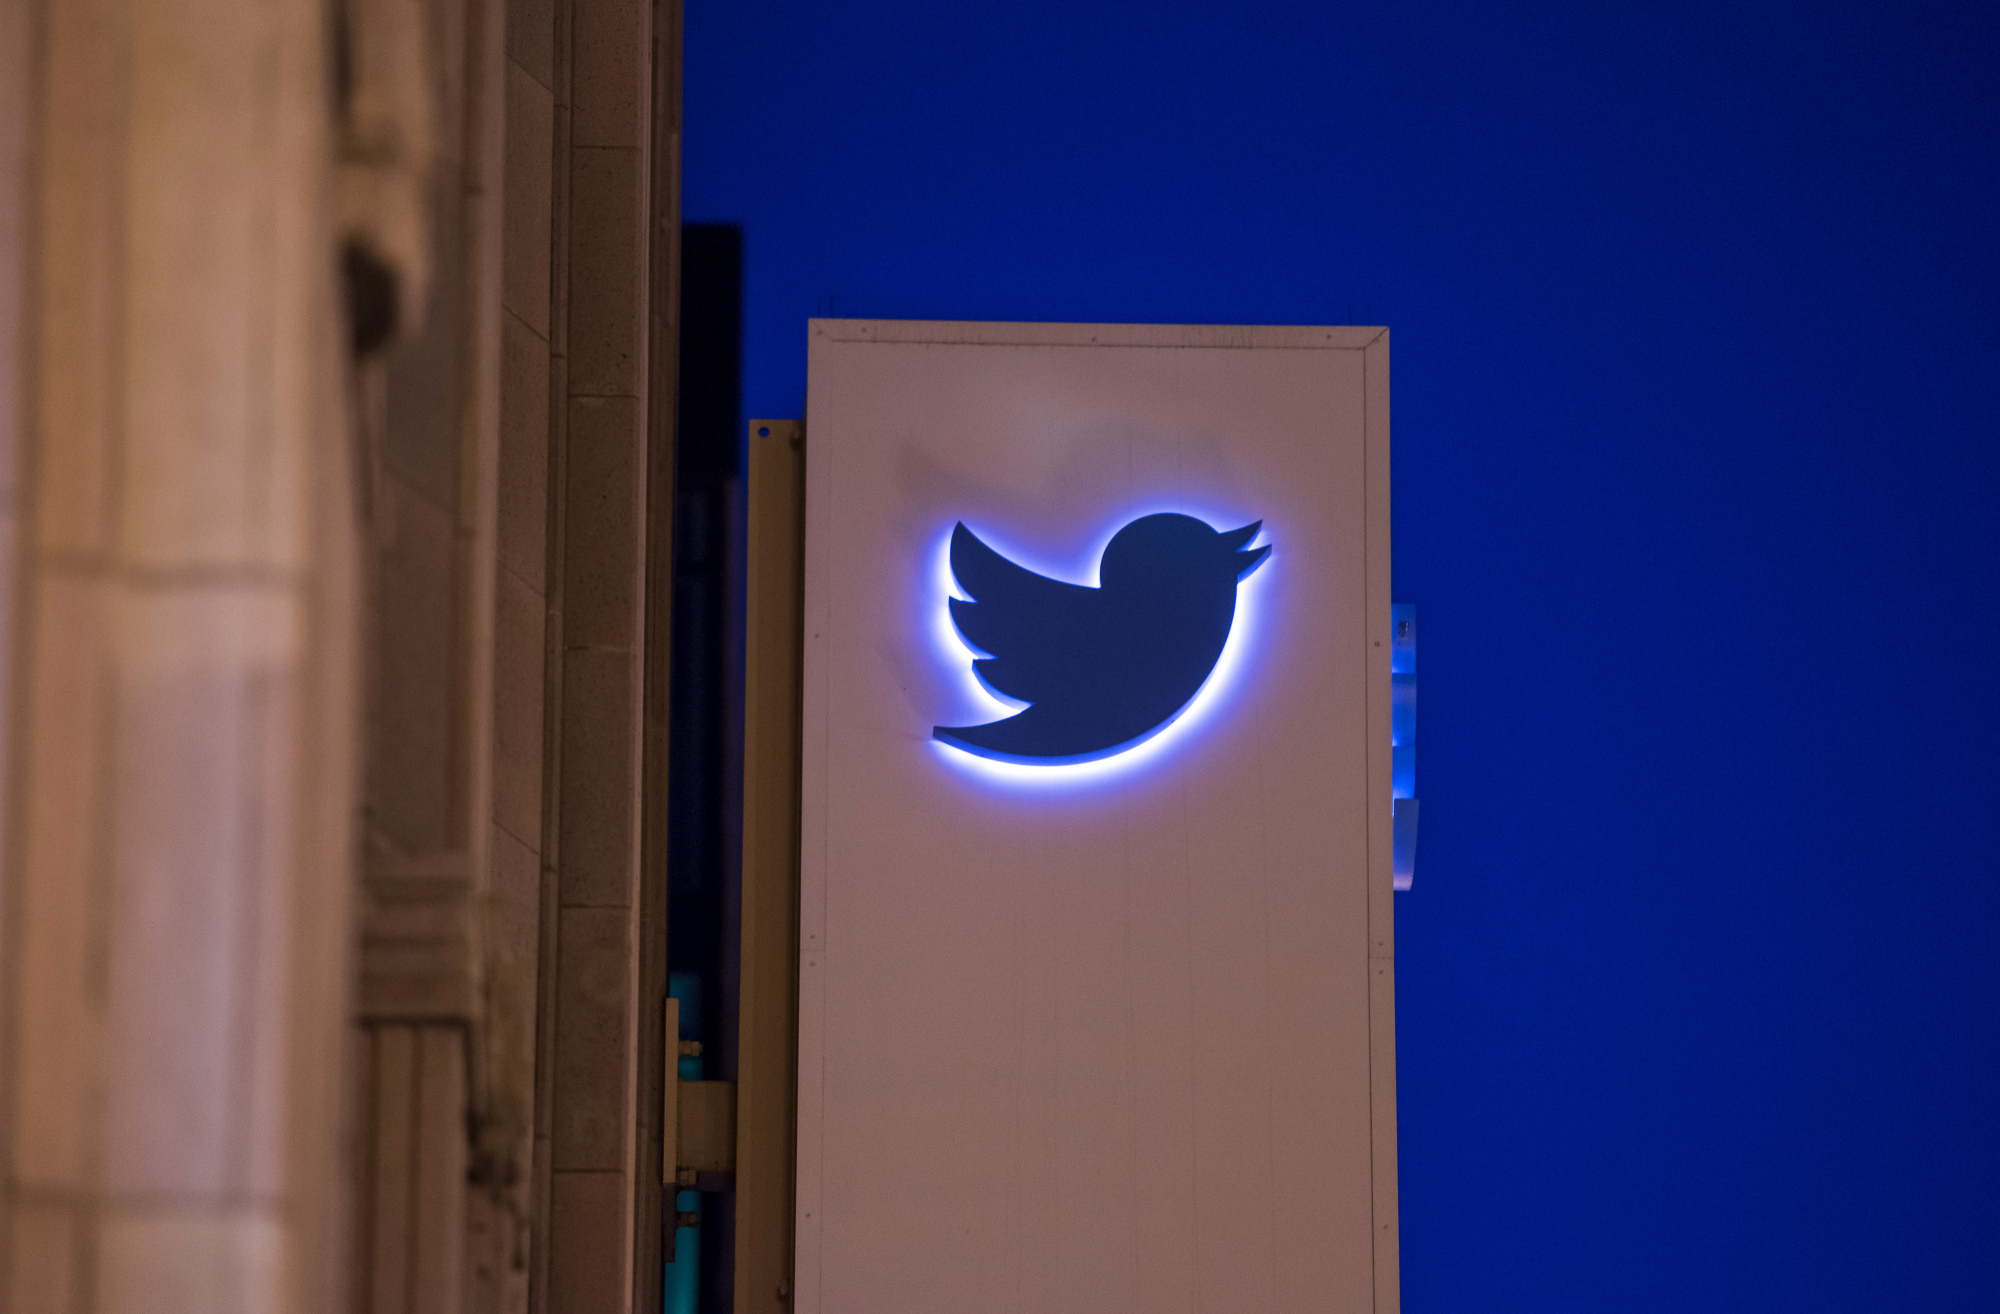 The Twitter Inc. logo and signage is displayed on the facade of the company's headquarters in San Francisco, California, U.S., on Wednesday, Oct. 21, 2015. Twitter Inc. is expected to release earnings figures on Oct. 27.
